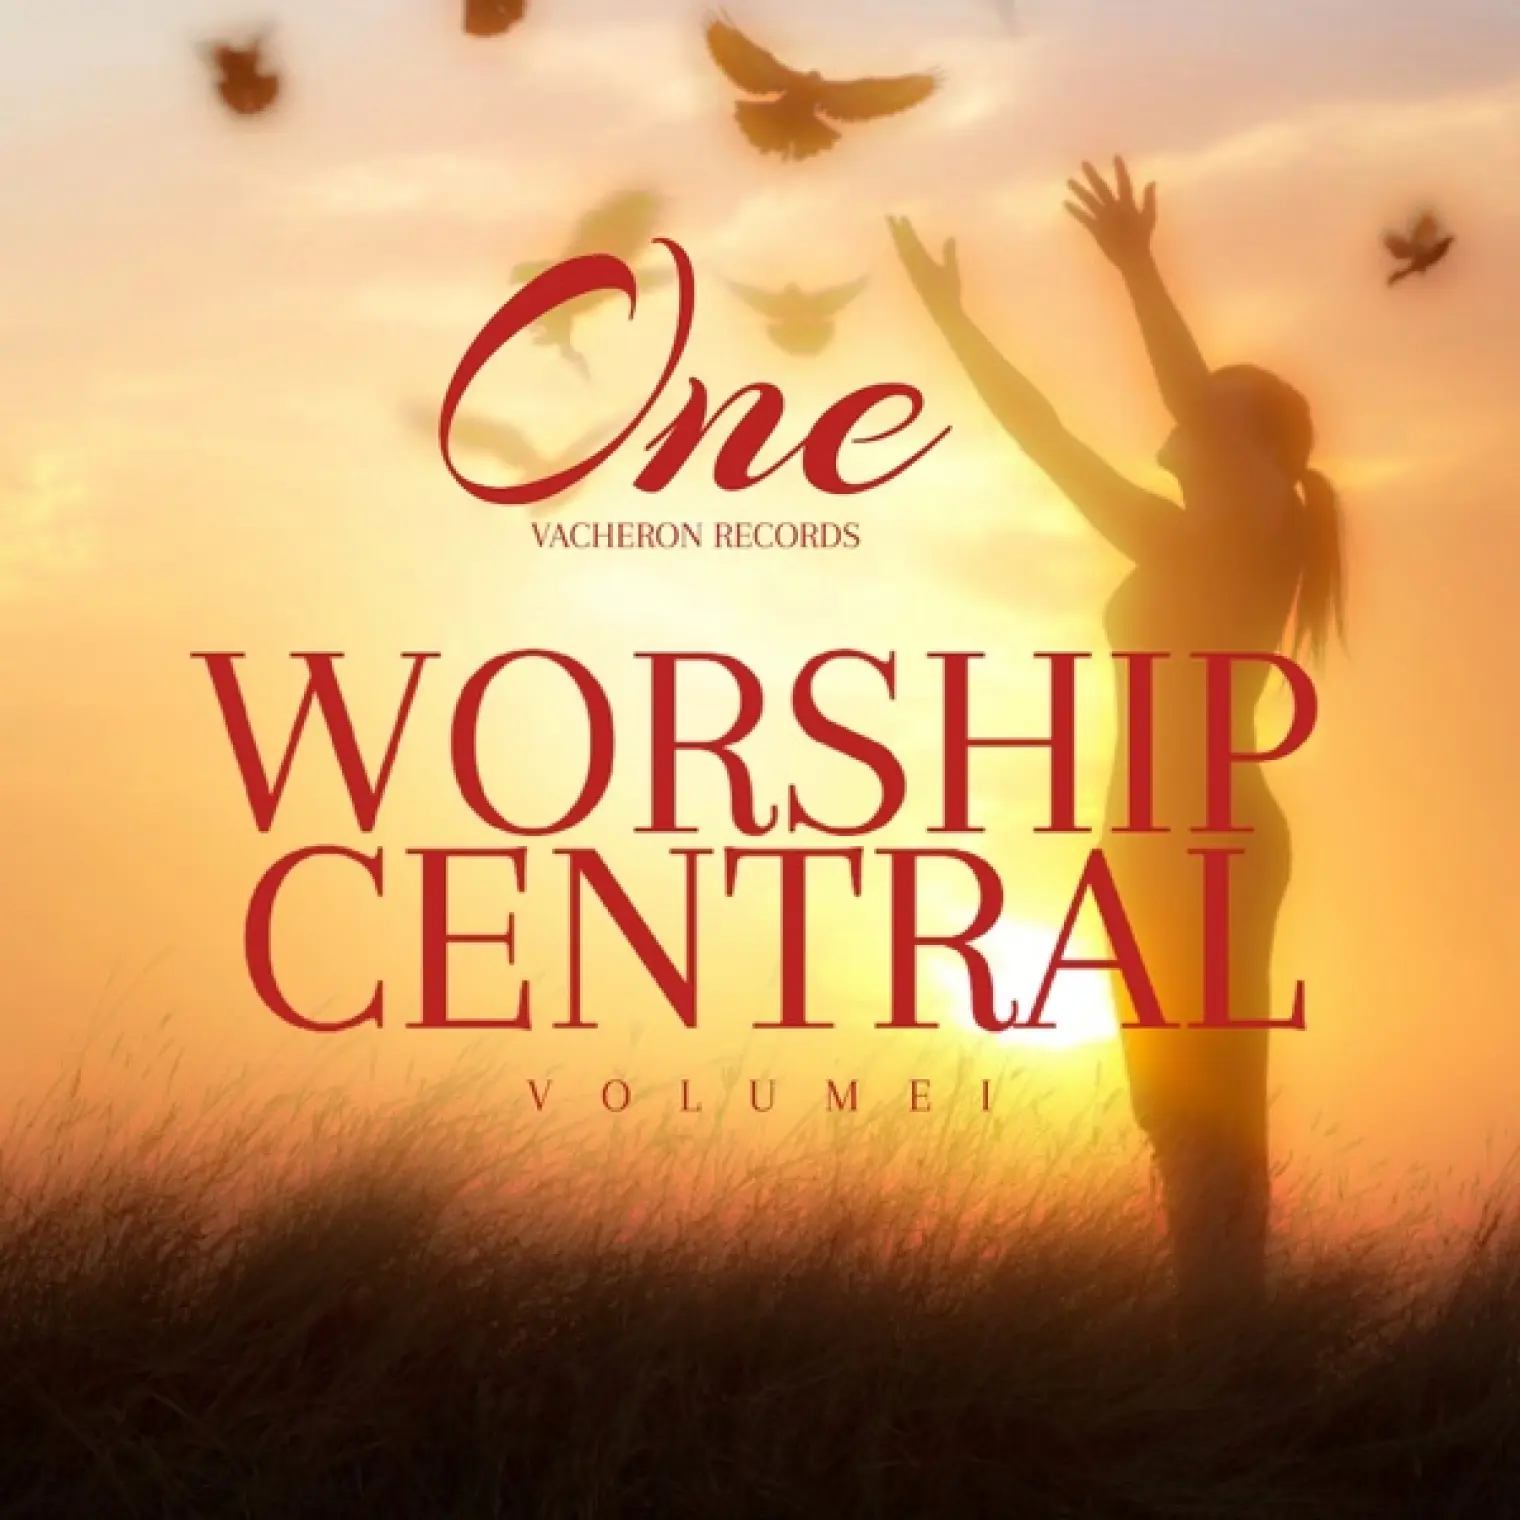 Worship Central, Vol. 1 -  One 